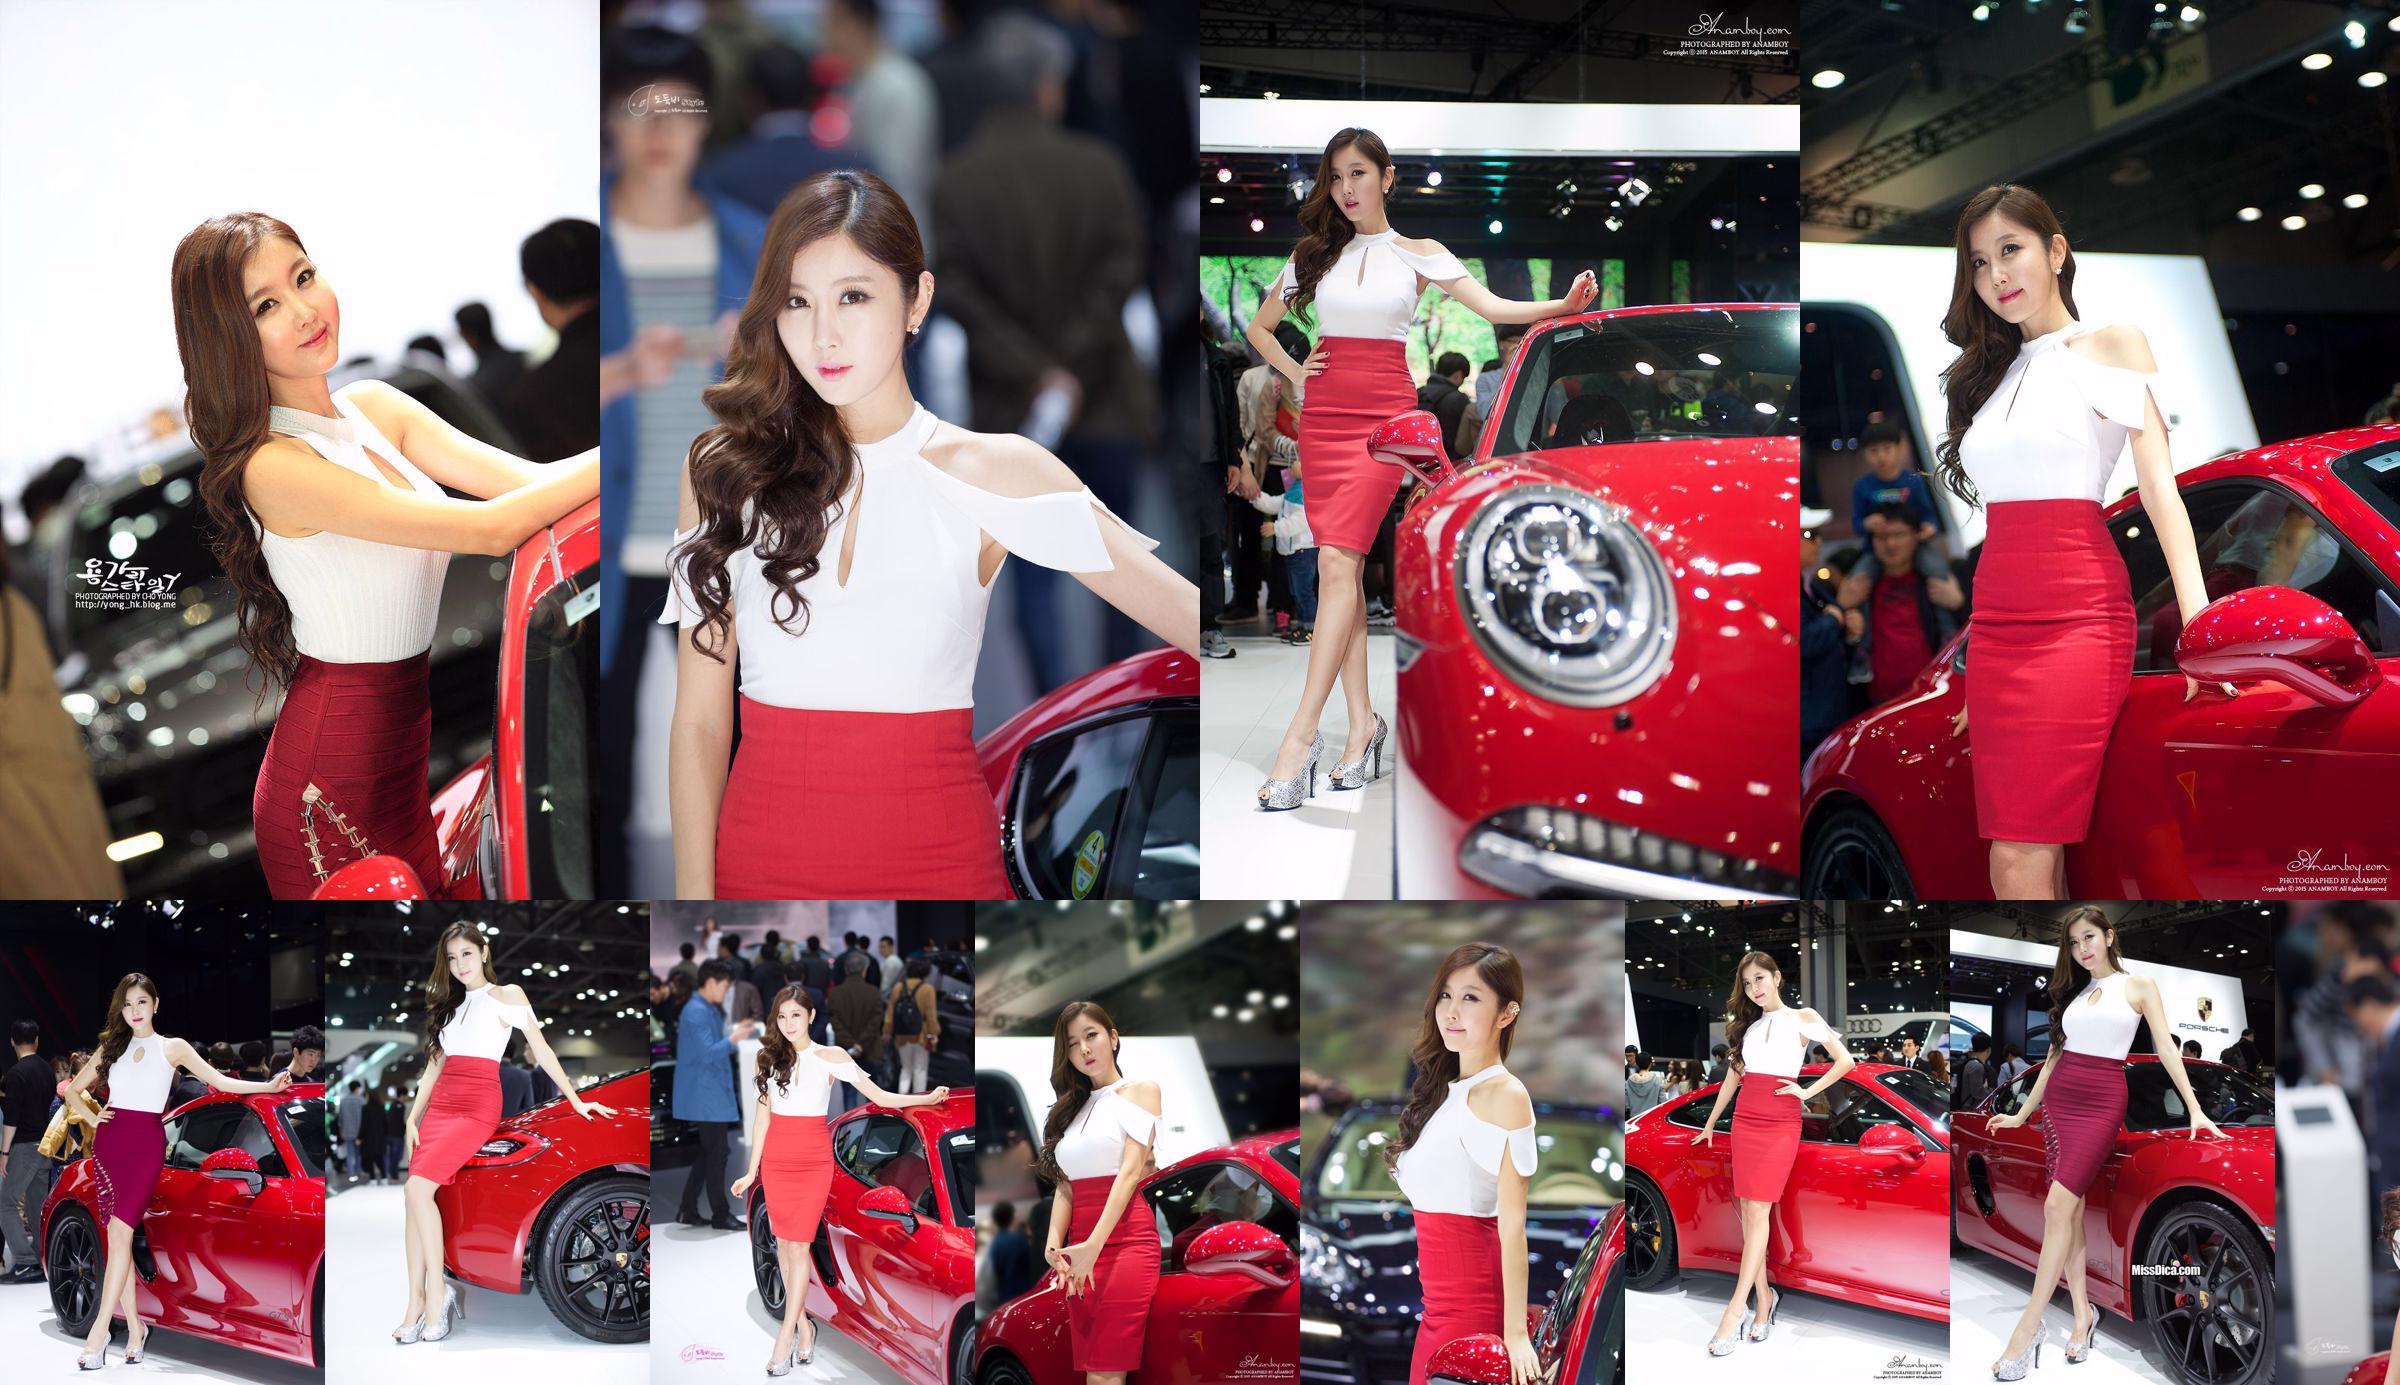 Photo Collection of Korean Car Model Cui Xingya/Cui Xinger's "Red Skirt Series at Auto Show" No.a31aa7 Page 4